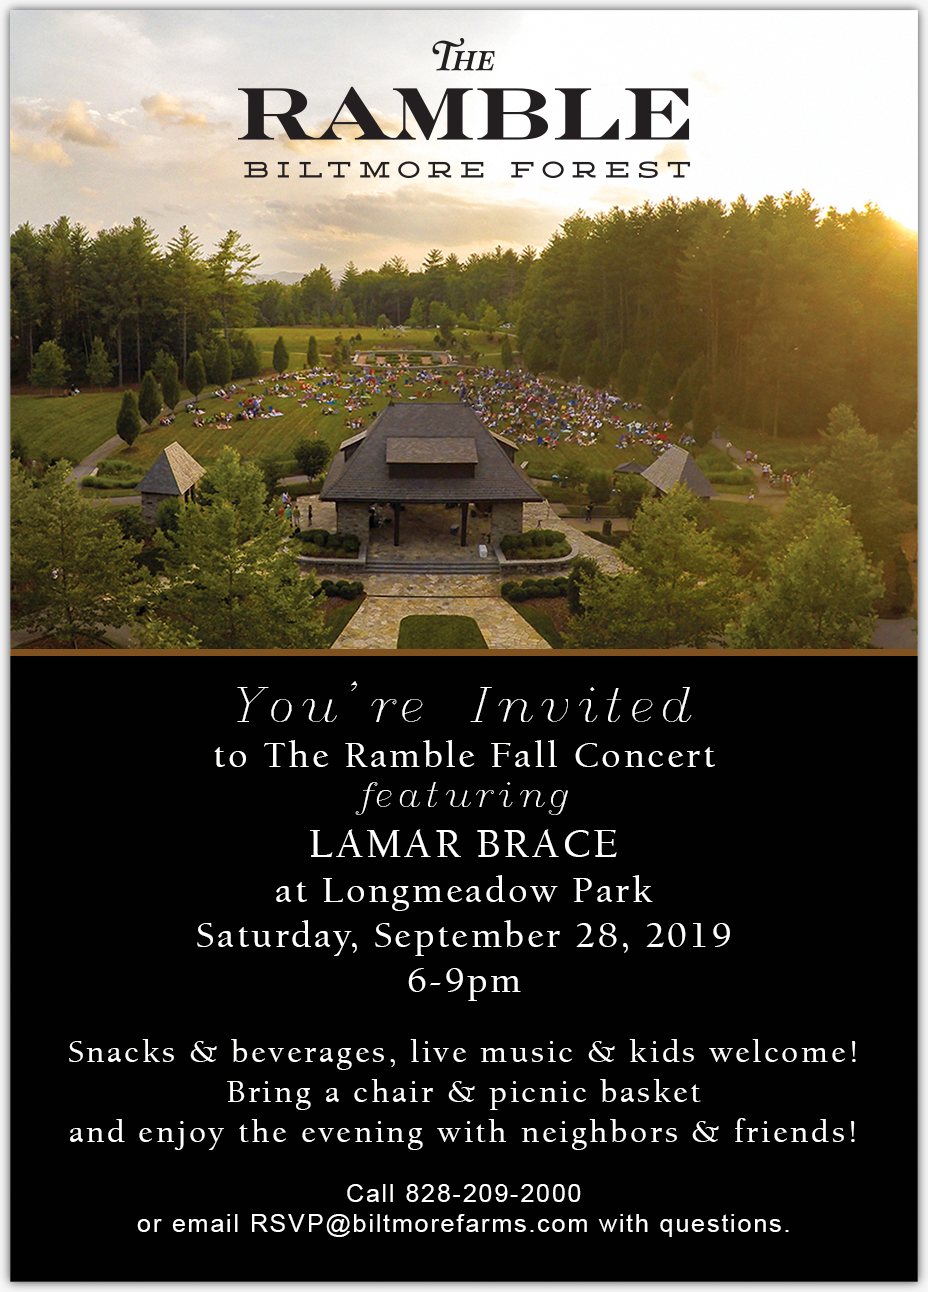 Enable
                                                          images to view
                                                          The Ramble
                                                          2019 Fall
                                                          Concert